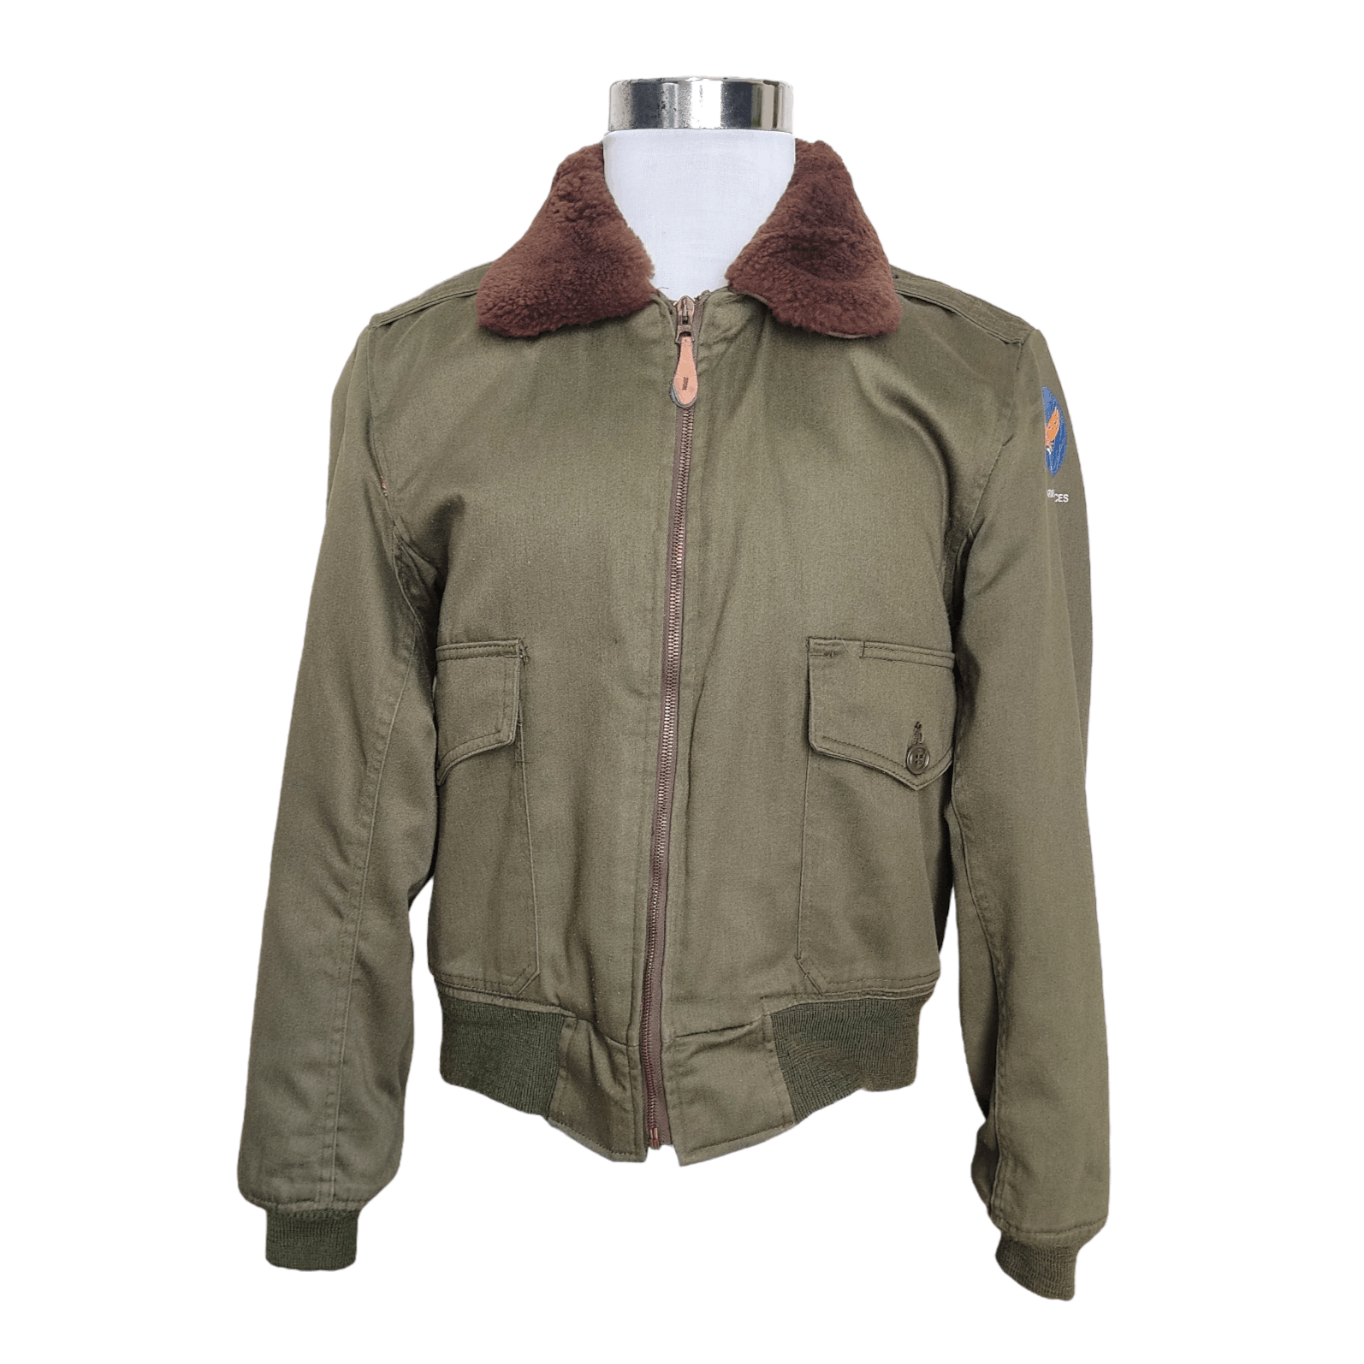 Us Air Force I. Spiewak & Sons Type B-10 Air Force Flight Jacket